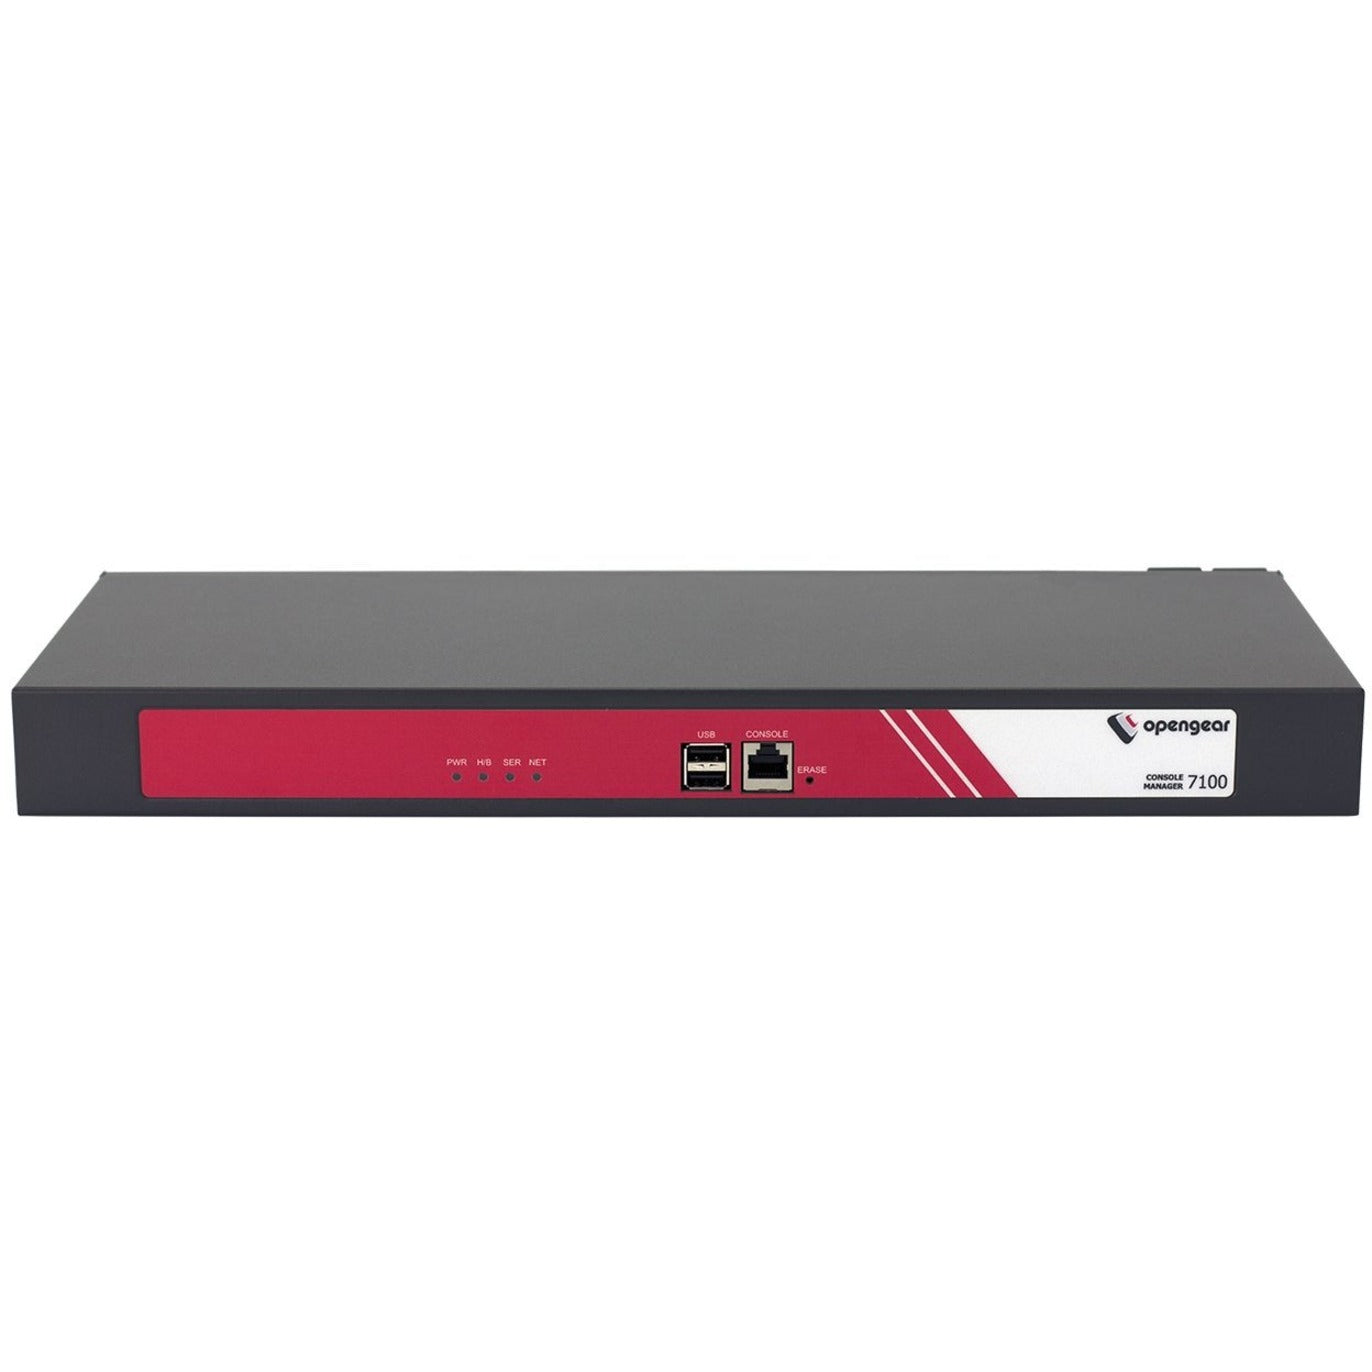 Opengear CM7132-2-DAC-US CM7100 Series Console Server, 32 Serial Ports, 256MB Memory, 4 Year Warranty